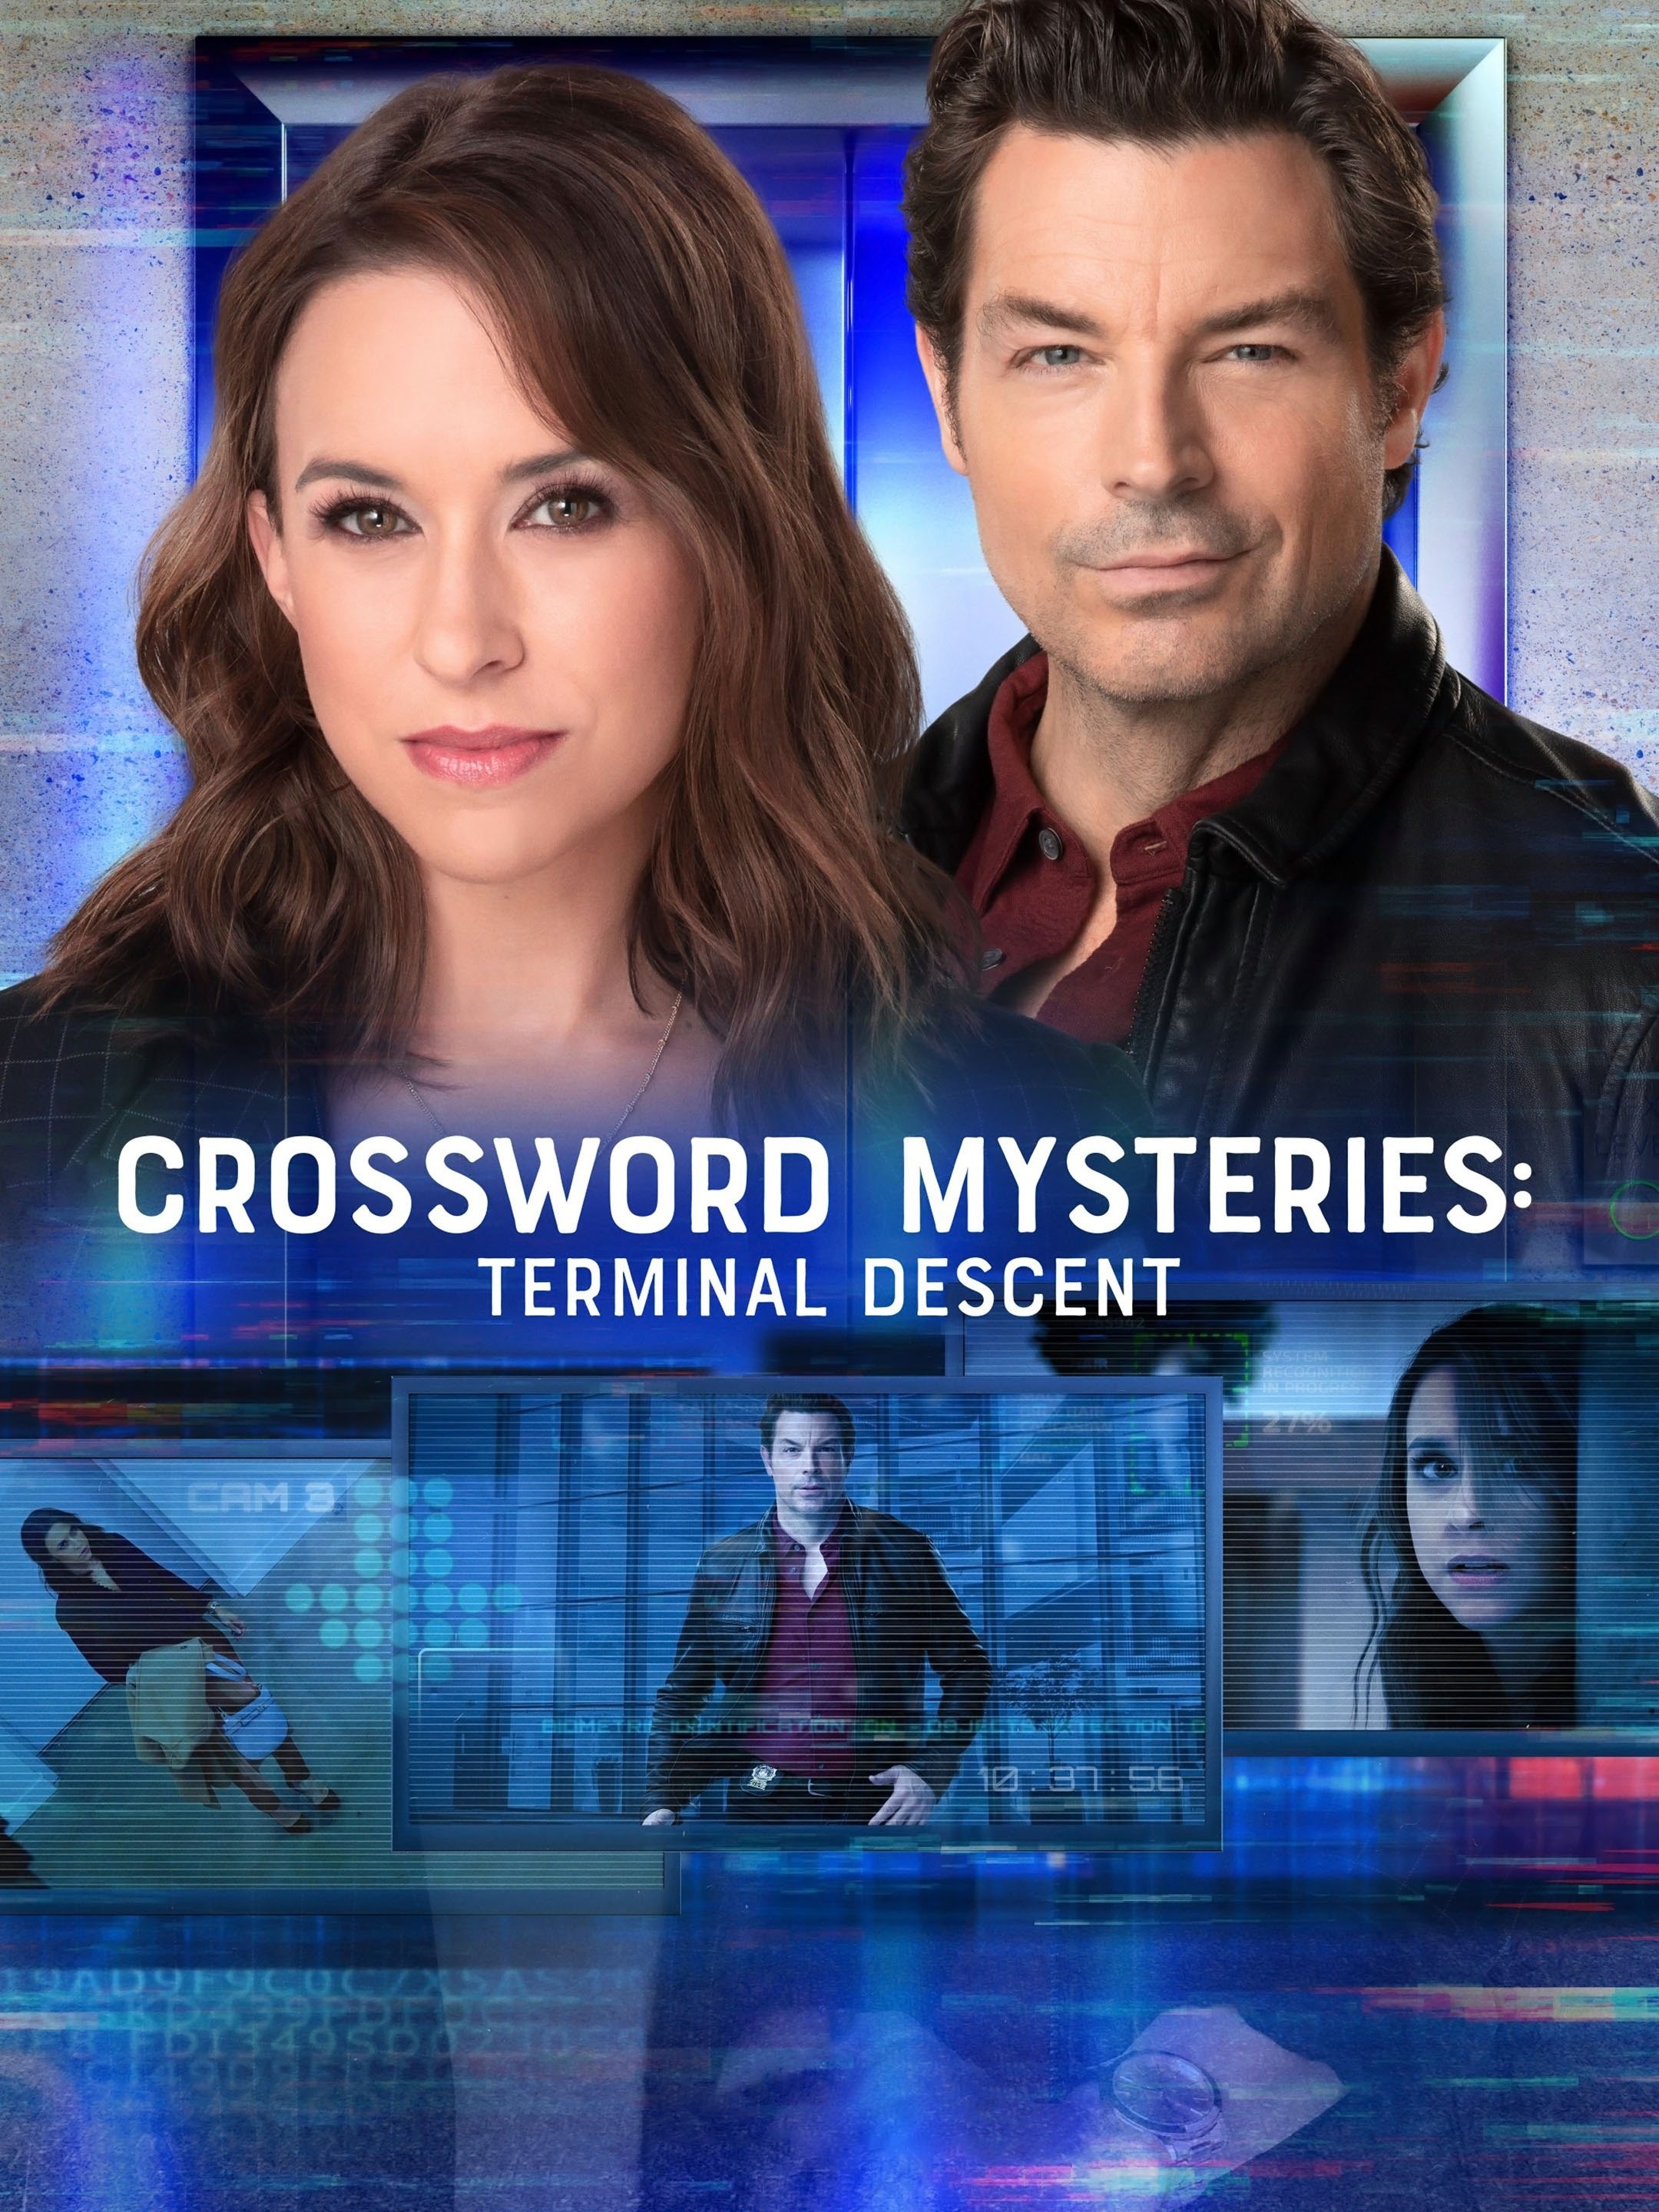 Crossword Mysteries: Terminal Descent Pictures Rotten Tomatoes